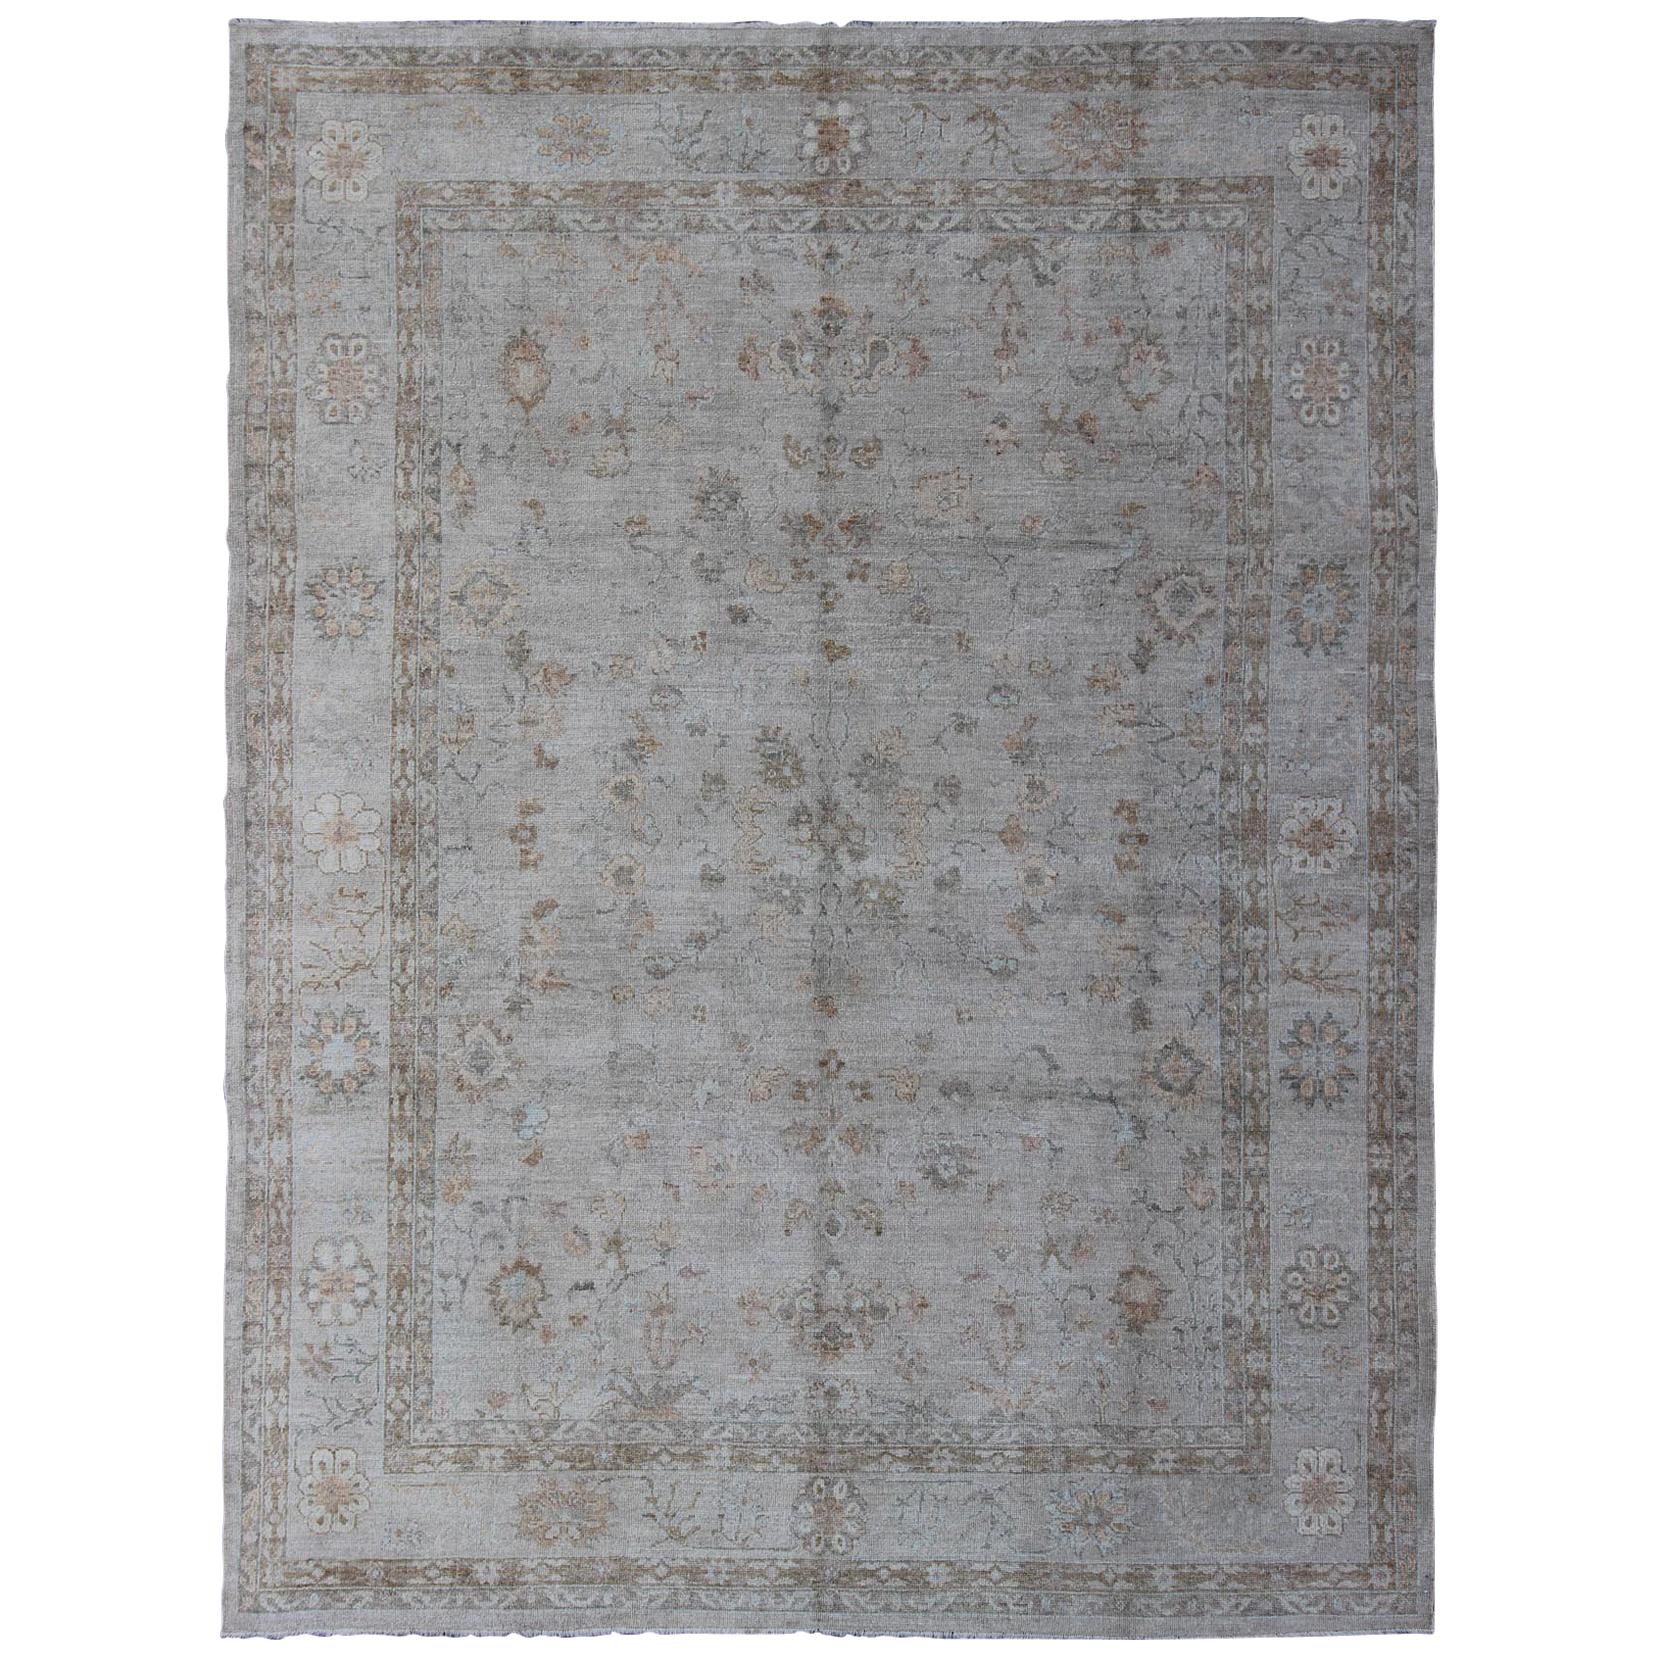 Large Turkish Angora Oushak Rug with All-Over Vining Floral Design in Neutral Co For Sale